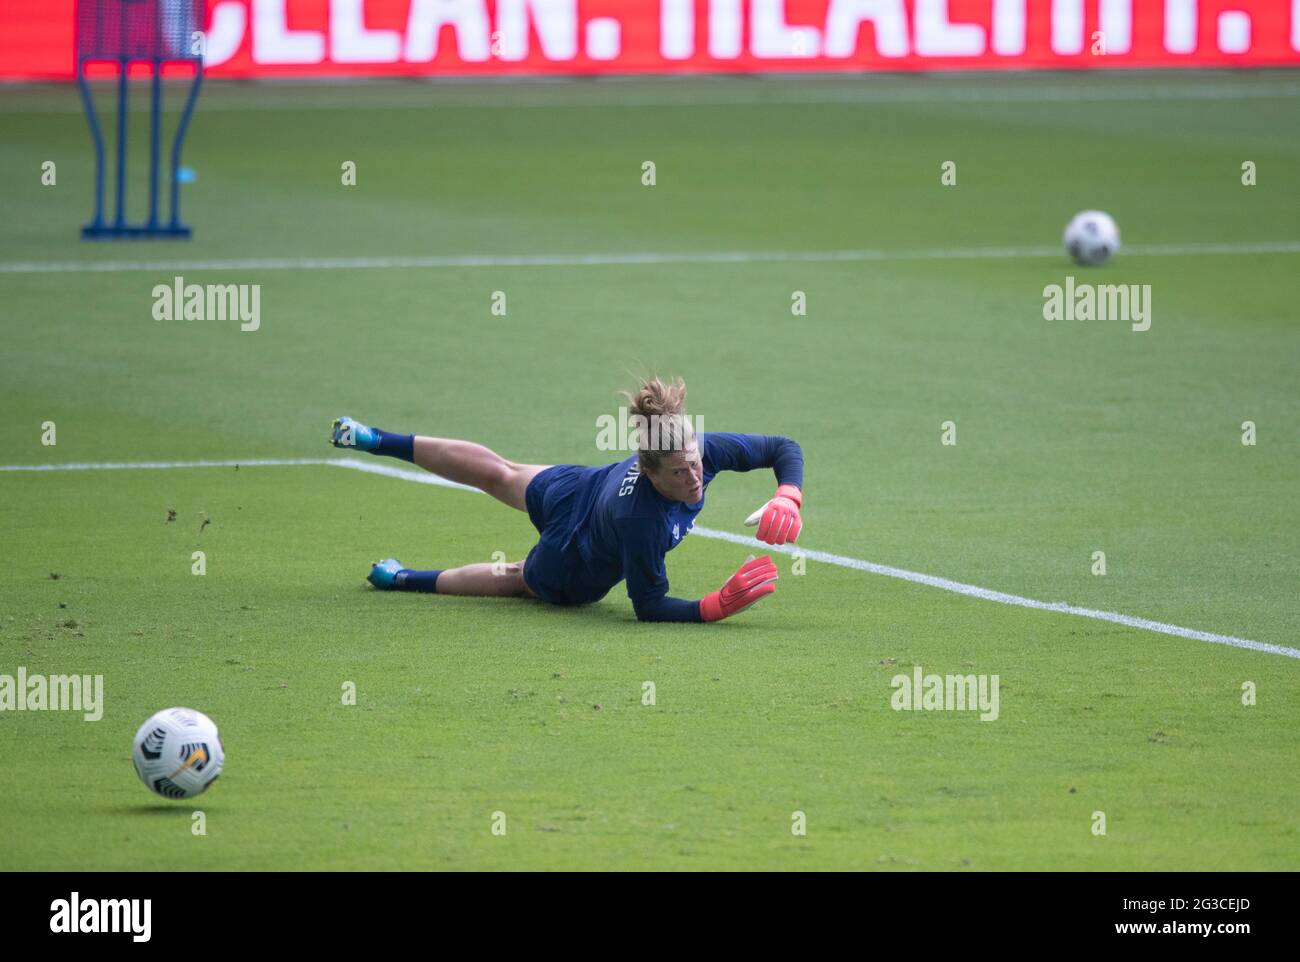 Austin, Texas, USA. 15th June, 2021. Members of the United States Women's National Team (USWNT) including goalkeeper ALYSSA NAEHR, warm up at the new Q2 soccer stadium in Austin during one of the final games on their road to the 2021 okyo Olympics. The team will play a friendly with Nigeria on Wednesday evening. Credit: Bob Daemmrich/ZUMA Wire/Alamy Live News Stock Photo